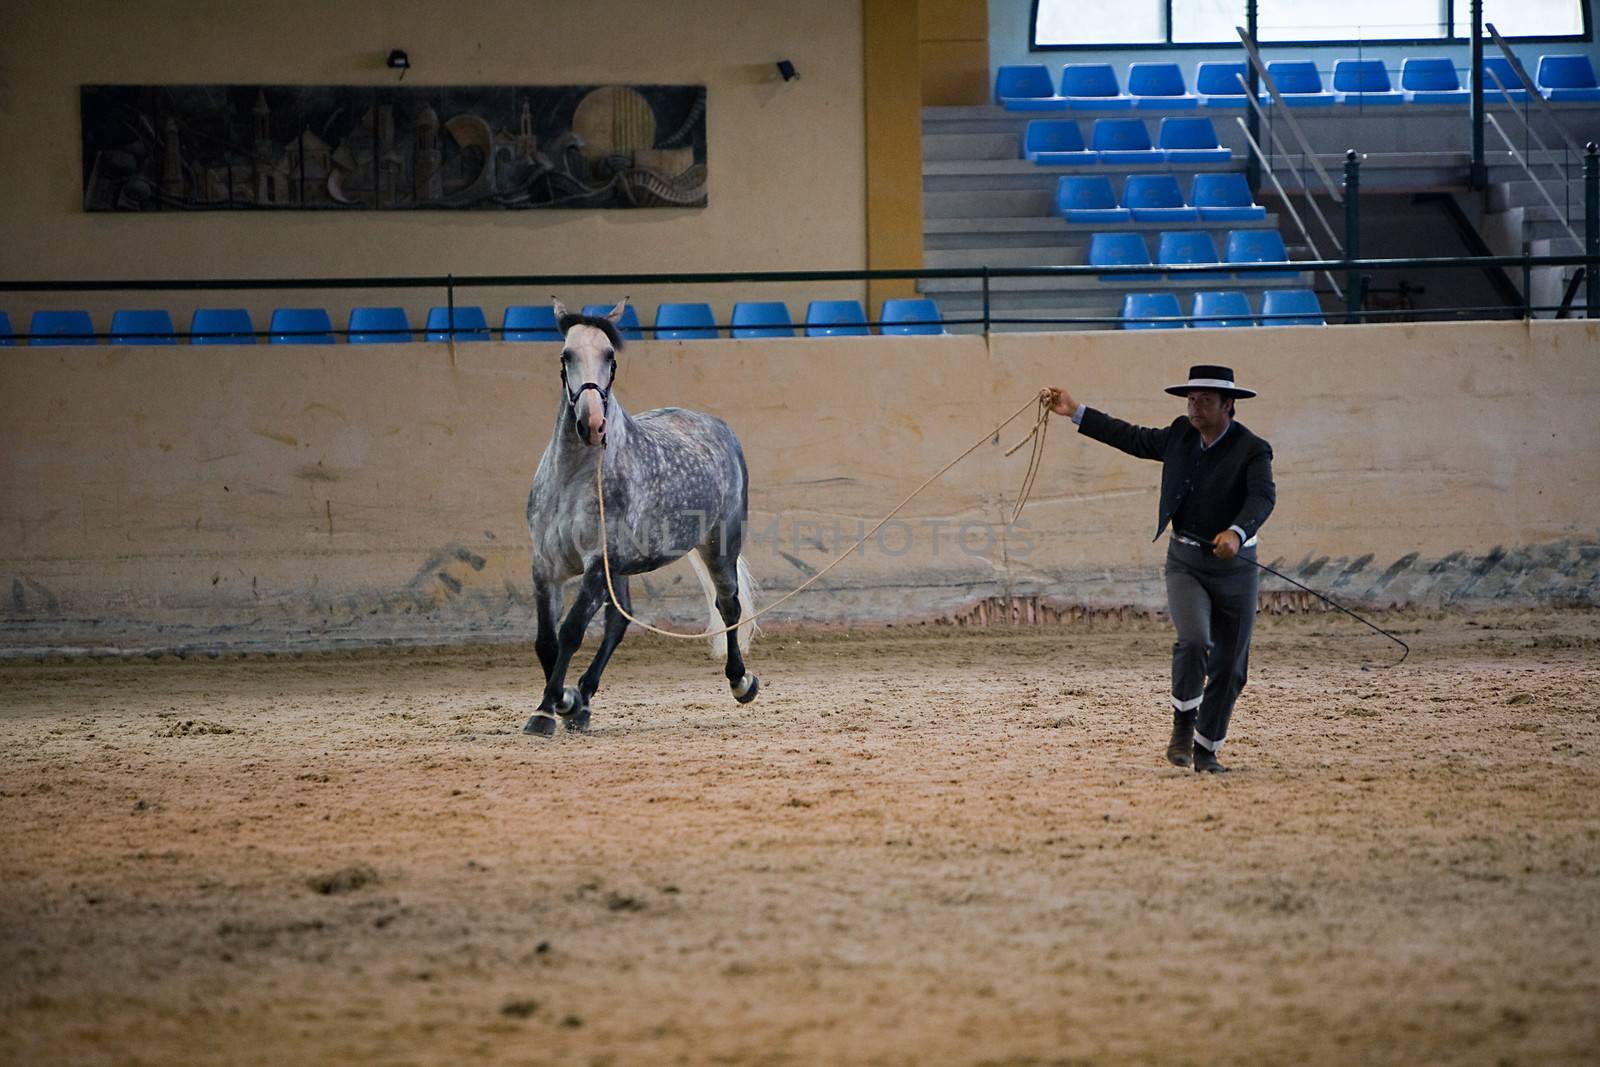 Equestrian test of morphology to pure Spanish horses, Spain